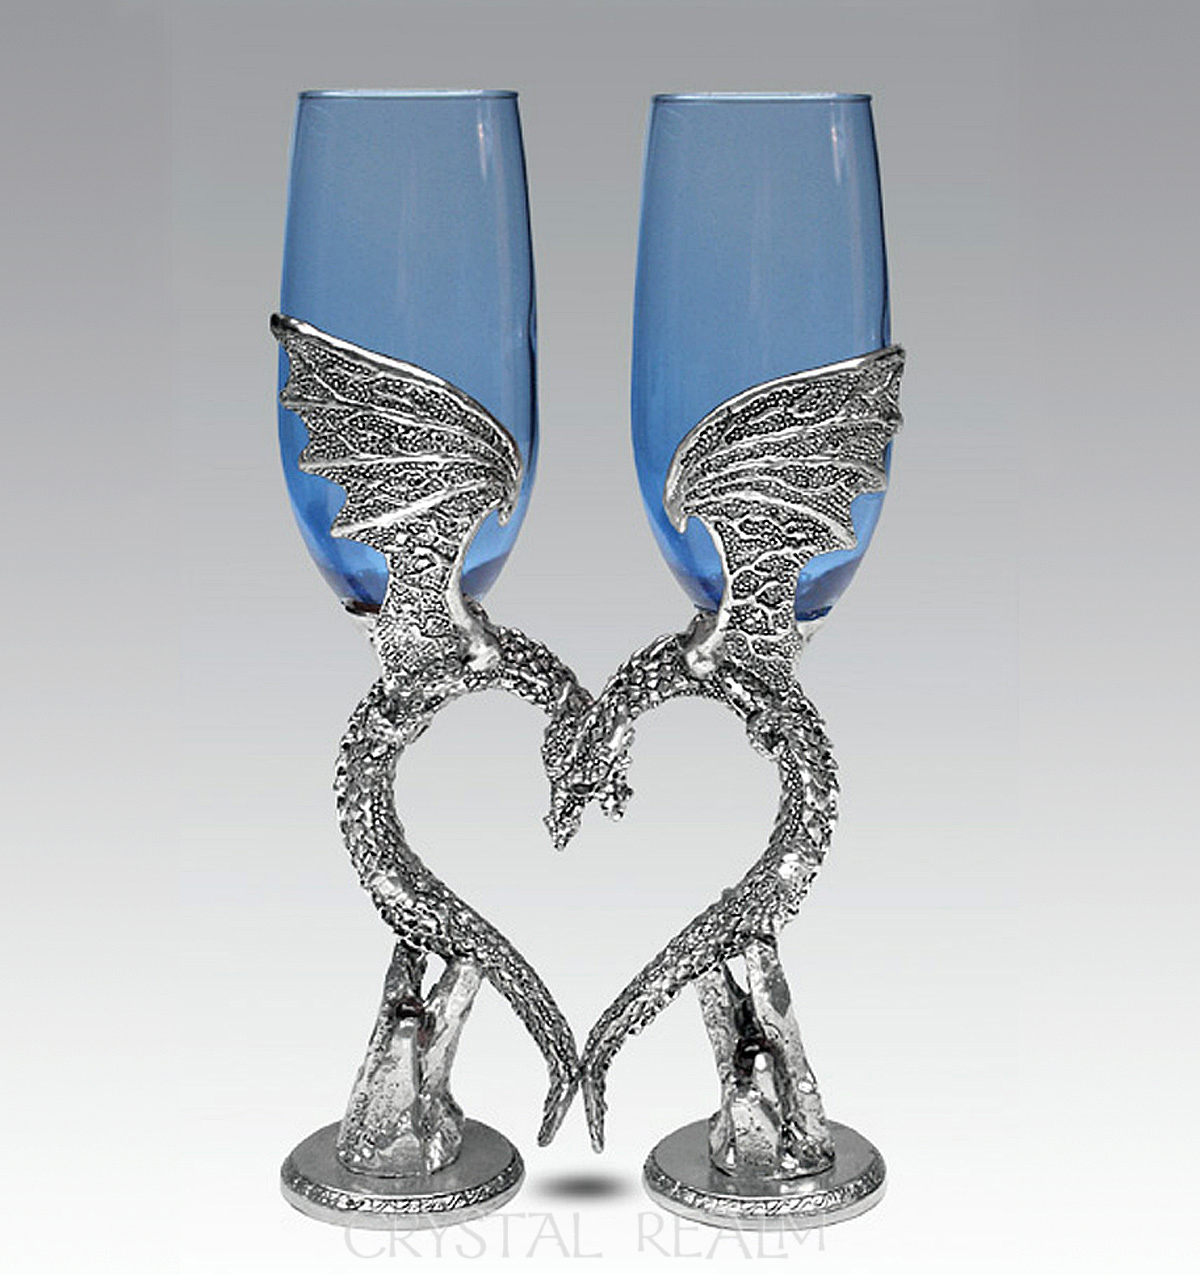 Blue champagne glasses are held by winged dragons in pewter forming a heart when at rest